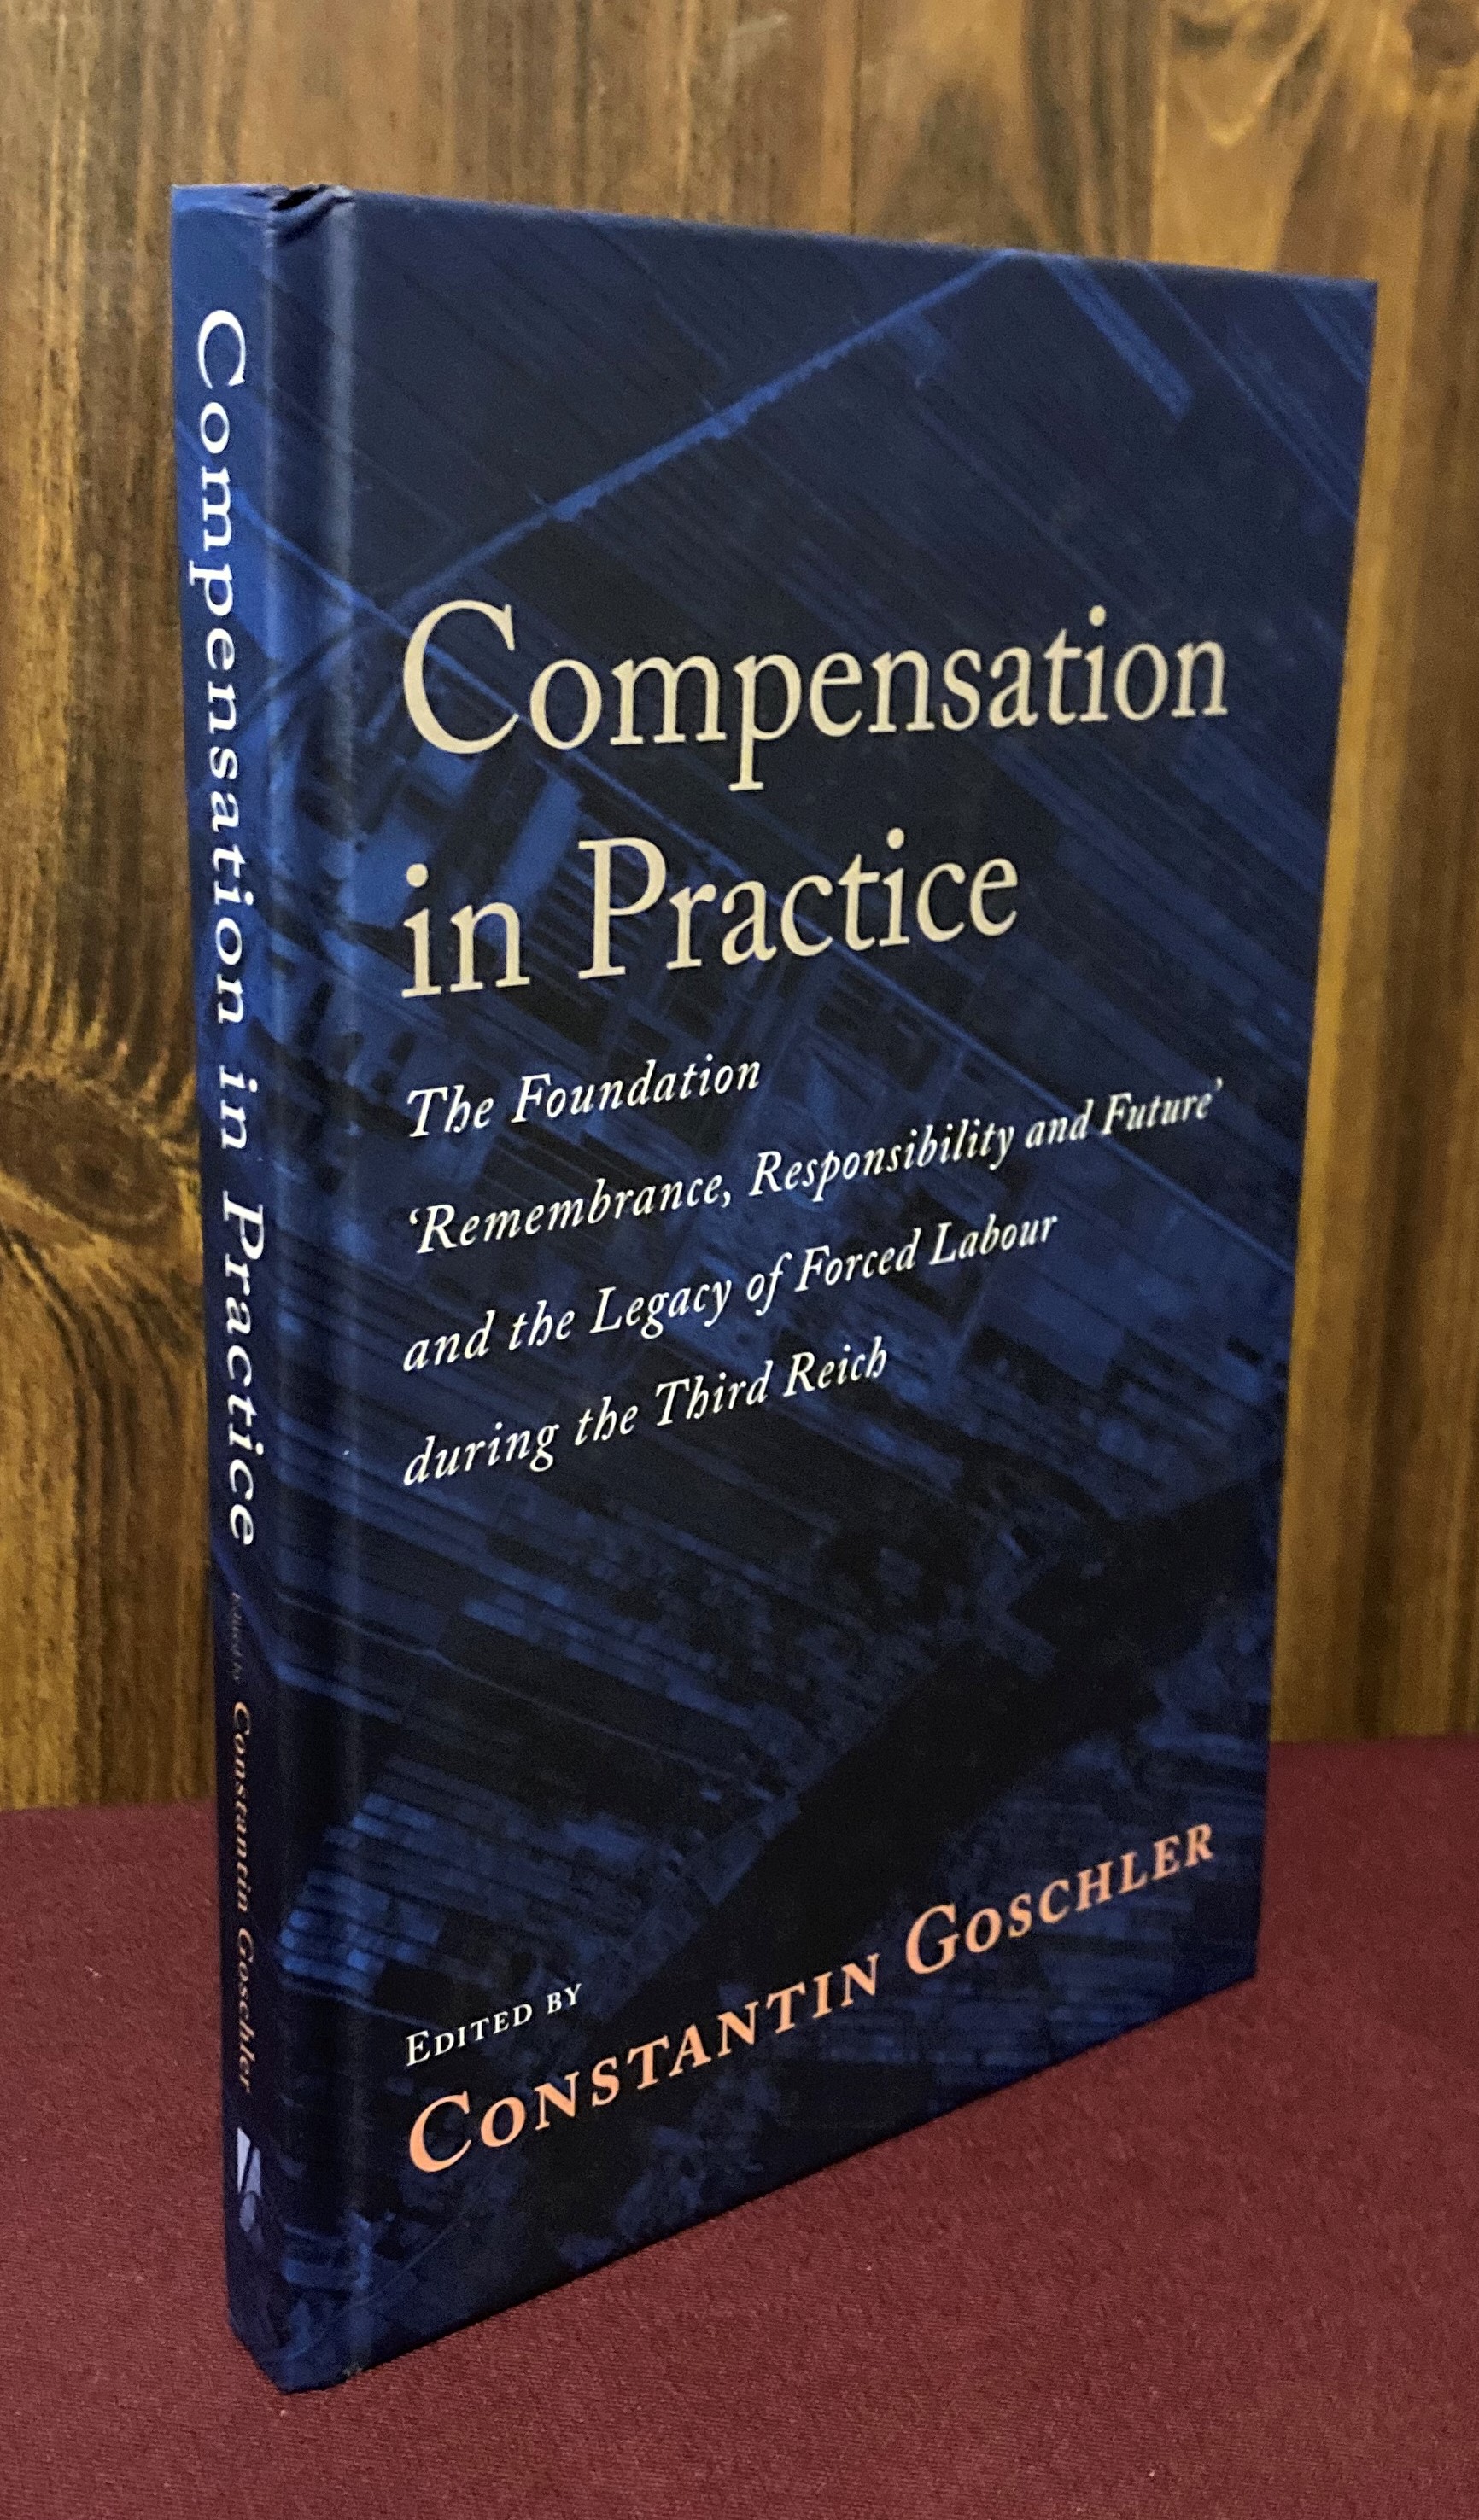 Compensation in Practice: The Foundation 'Remembrance, Responsibility and Future' and the Legacy of Forced Labour during the Third Reich - Constantin Goschler (Editor)